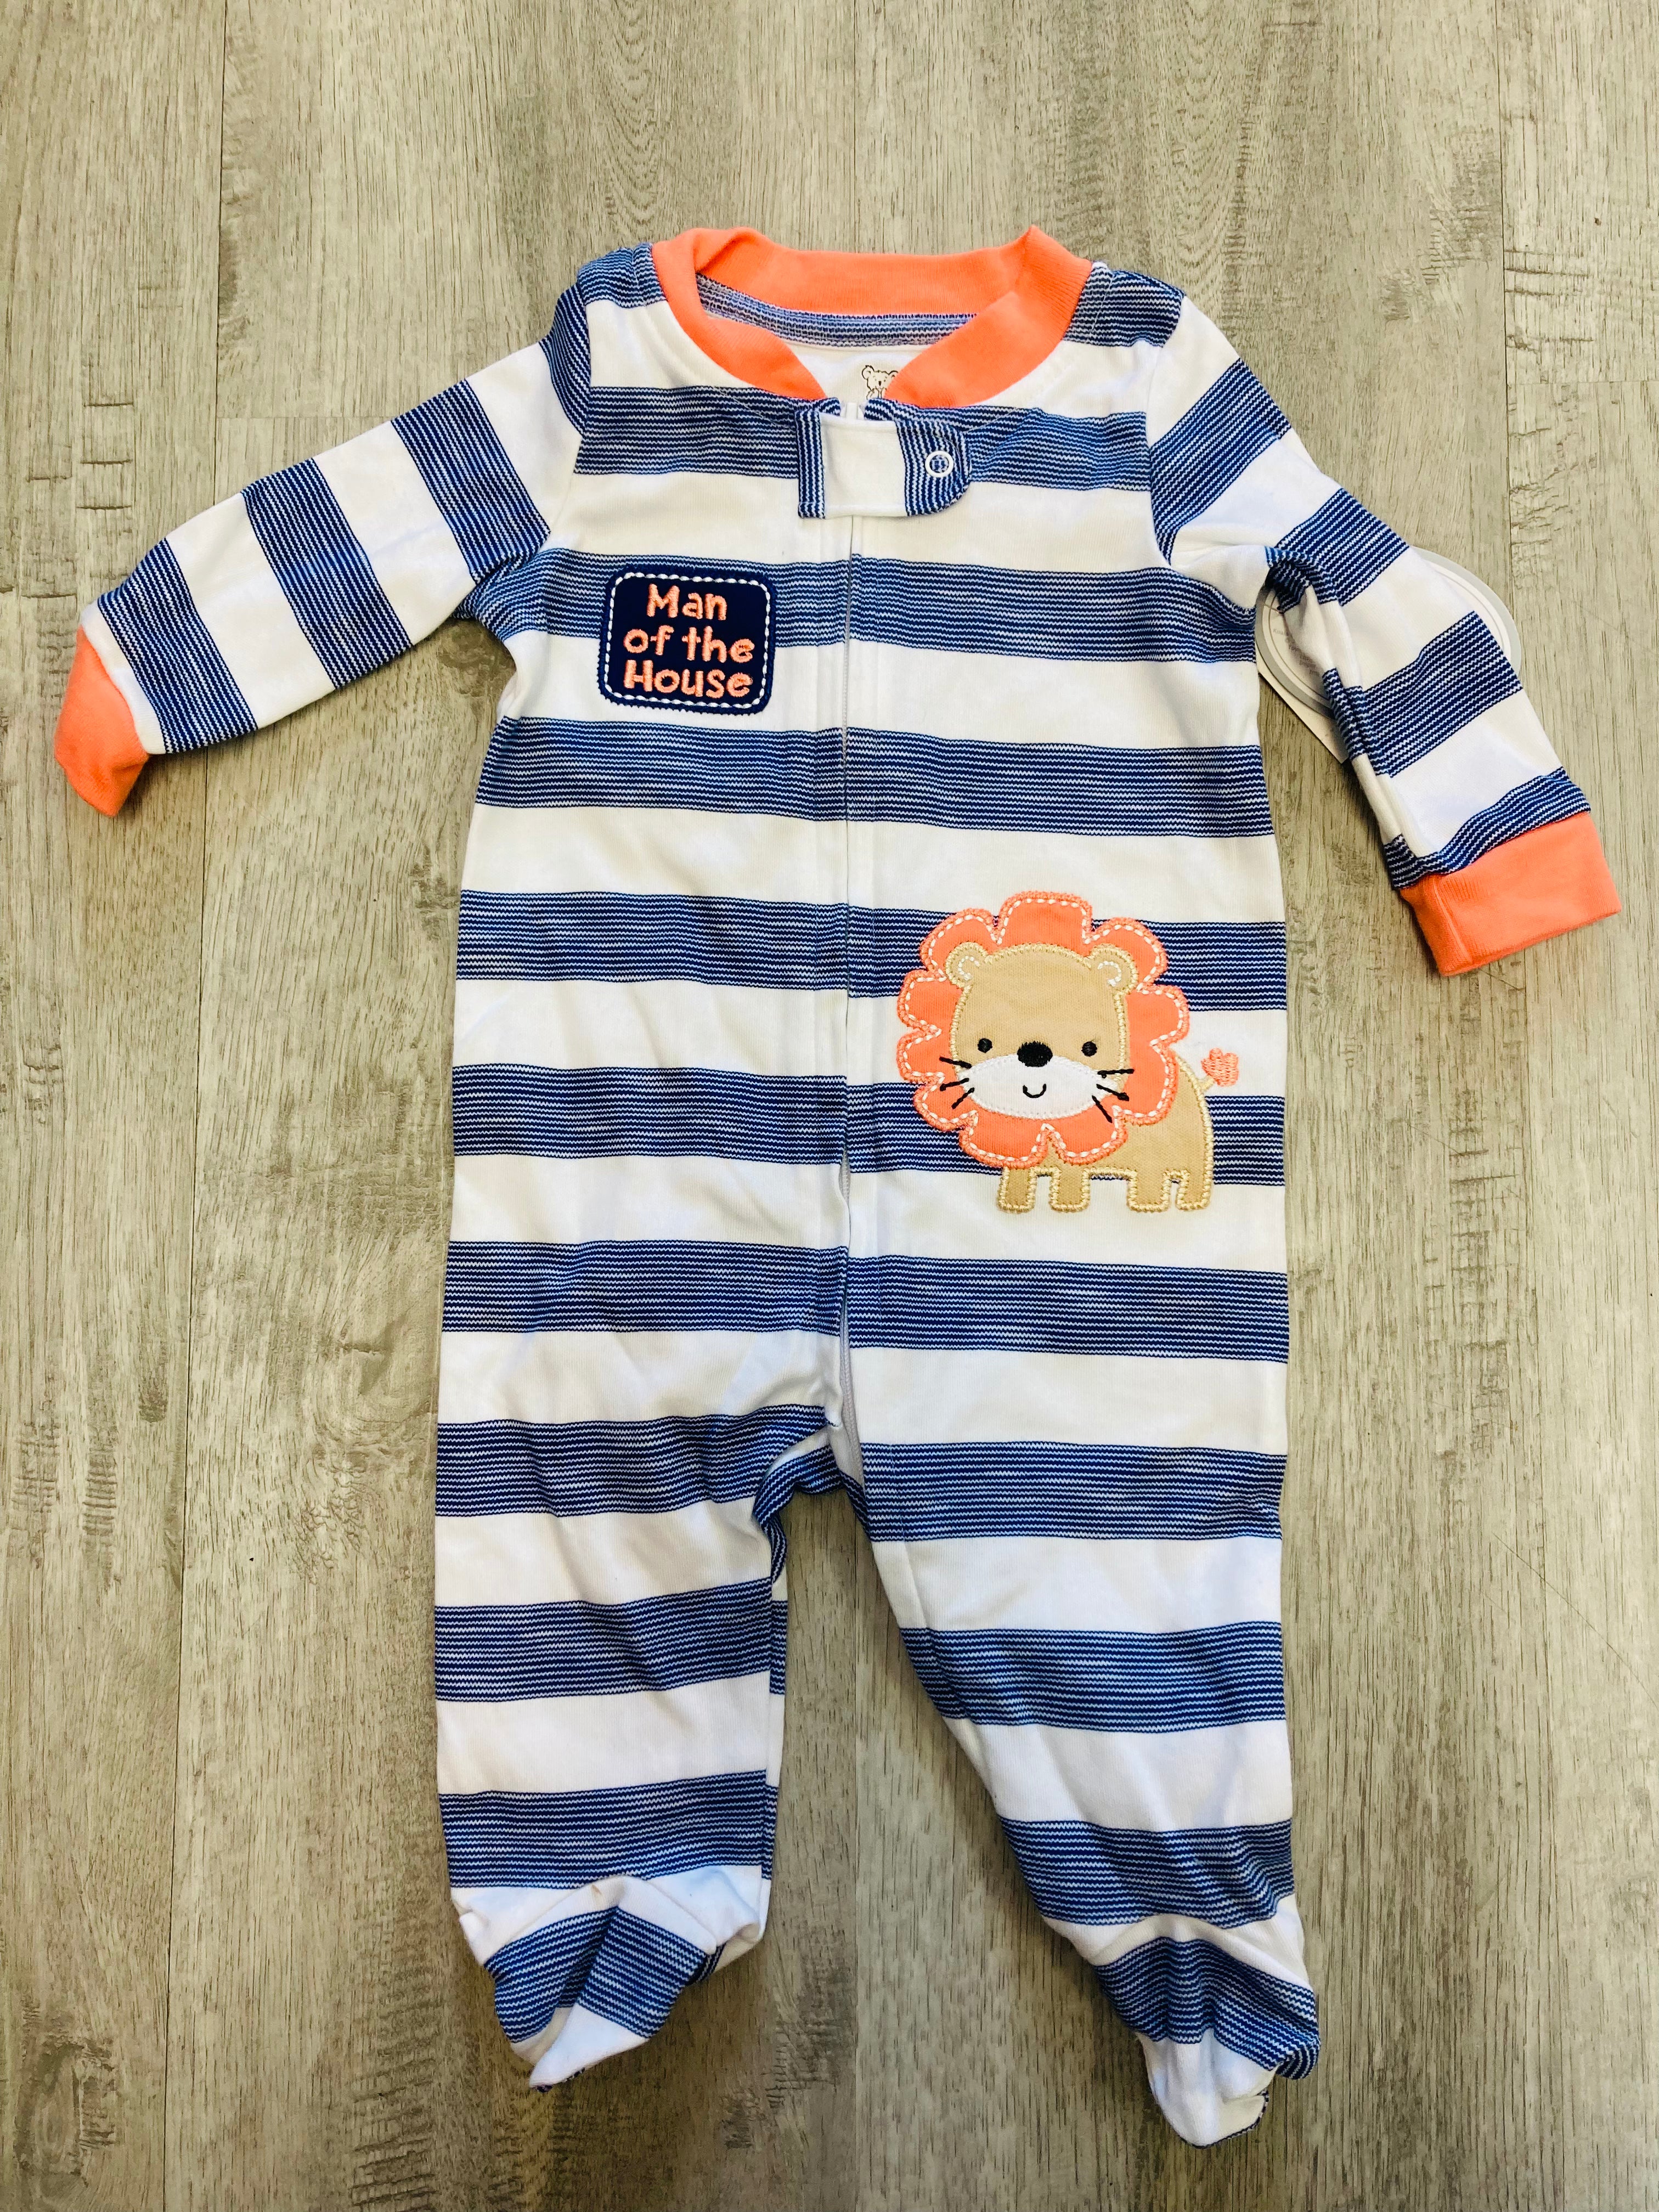 Baby and Kids Items